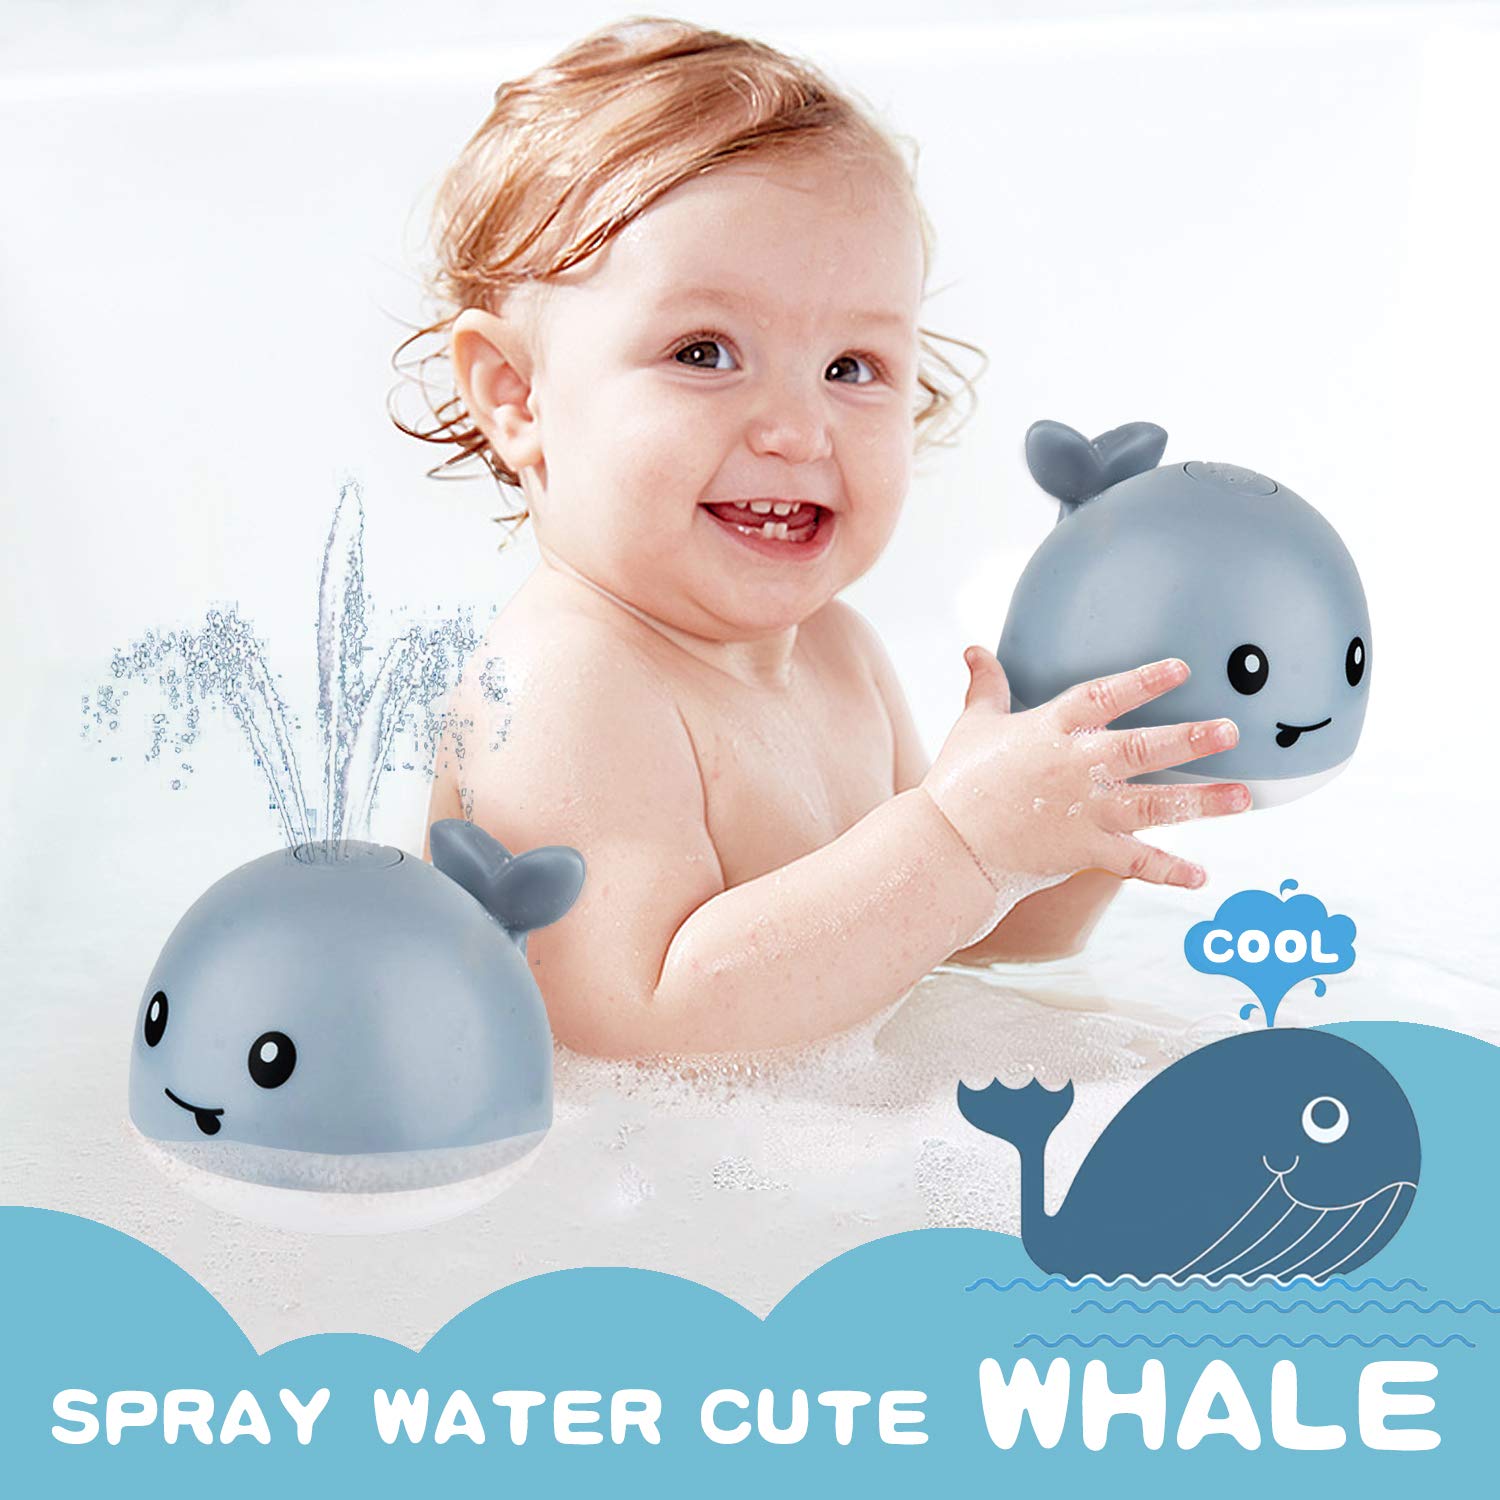 ZHENDUO Baby Bath Toys, Whale Automatic Spray Water Bath Toy with LED Light, Induction Sprinkler Bathtub Shower Toys for Toddlers Kids Boys Girls, Pool Bathroom Toy for Baby (Gray)